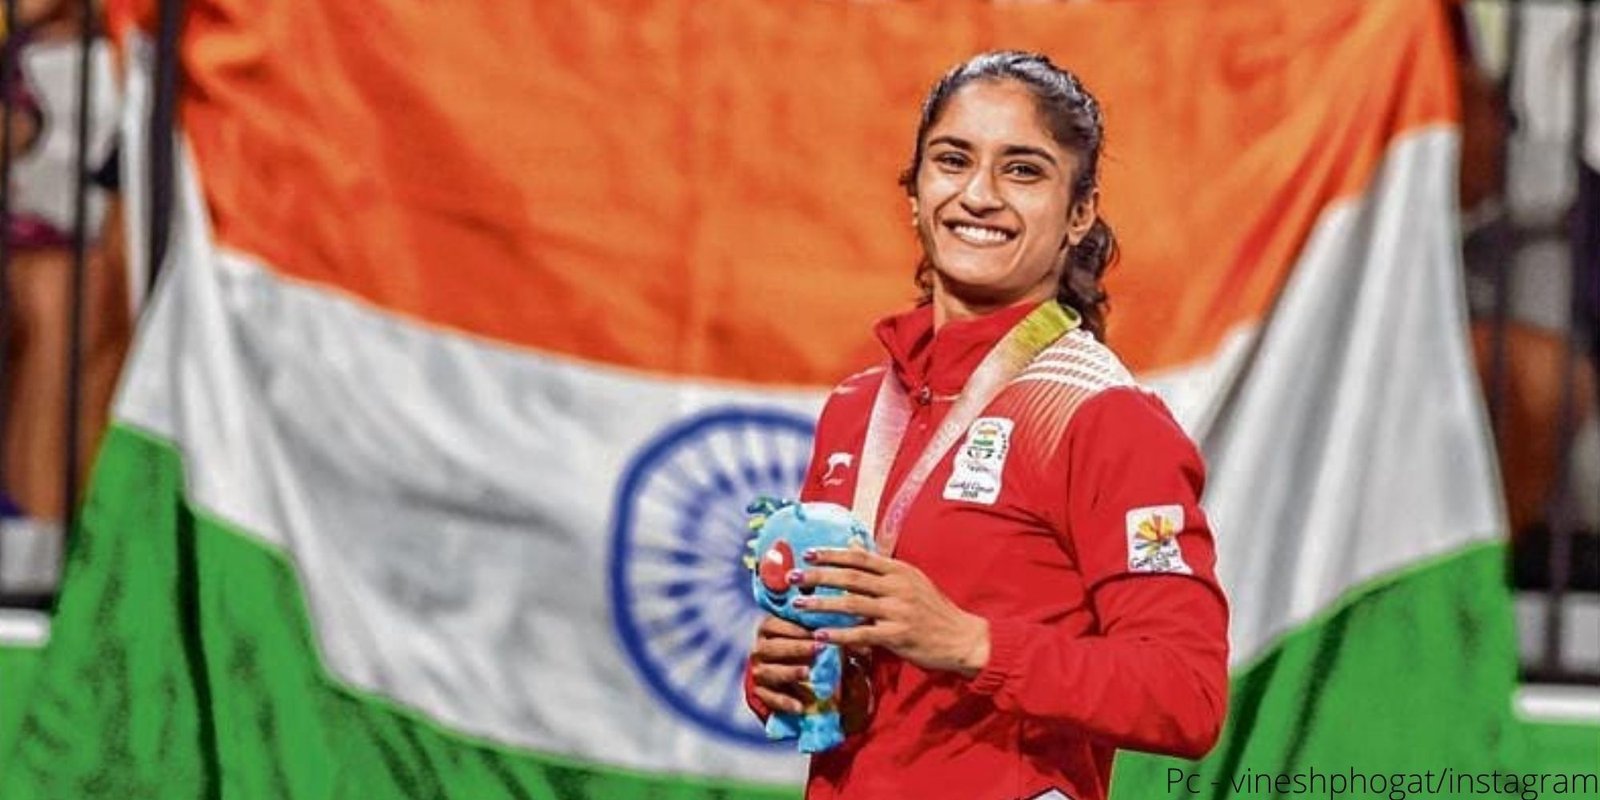 Vinesh Phogat, The First Indian Female Wrestler To Win Gold In Commonwealth and Asian Games For India